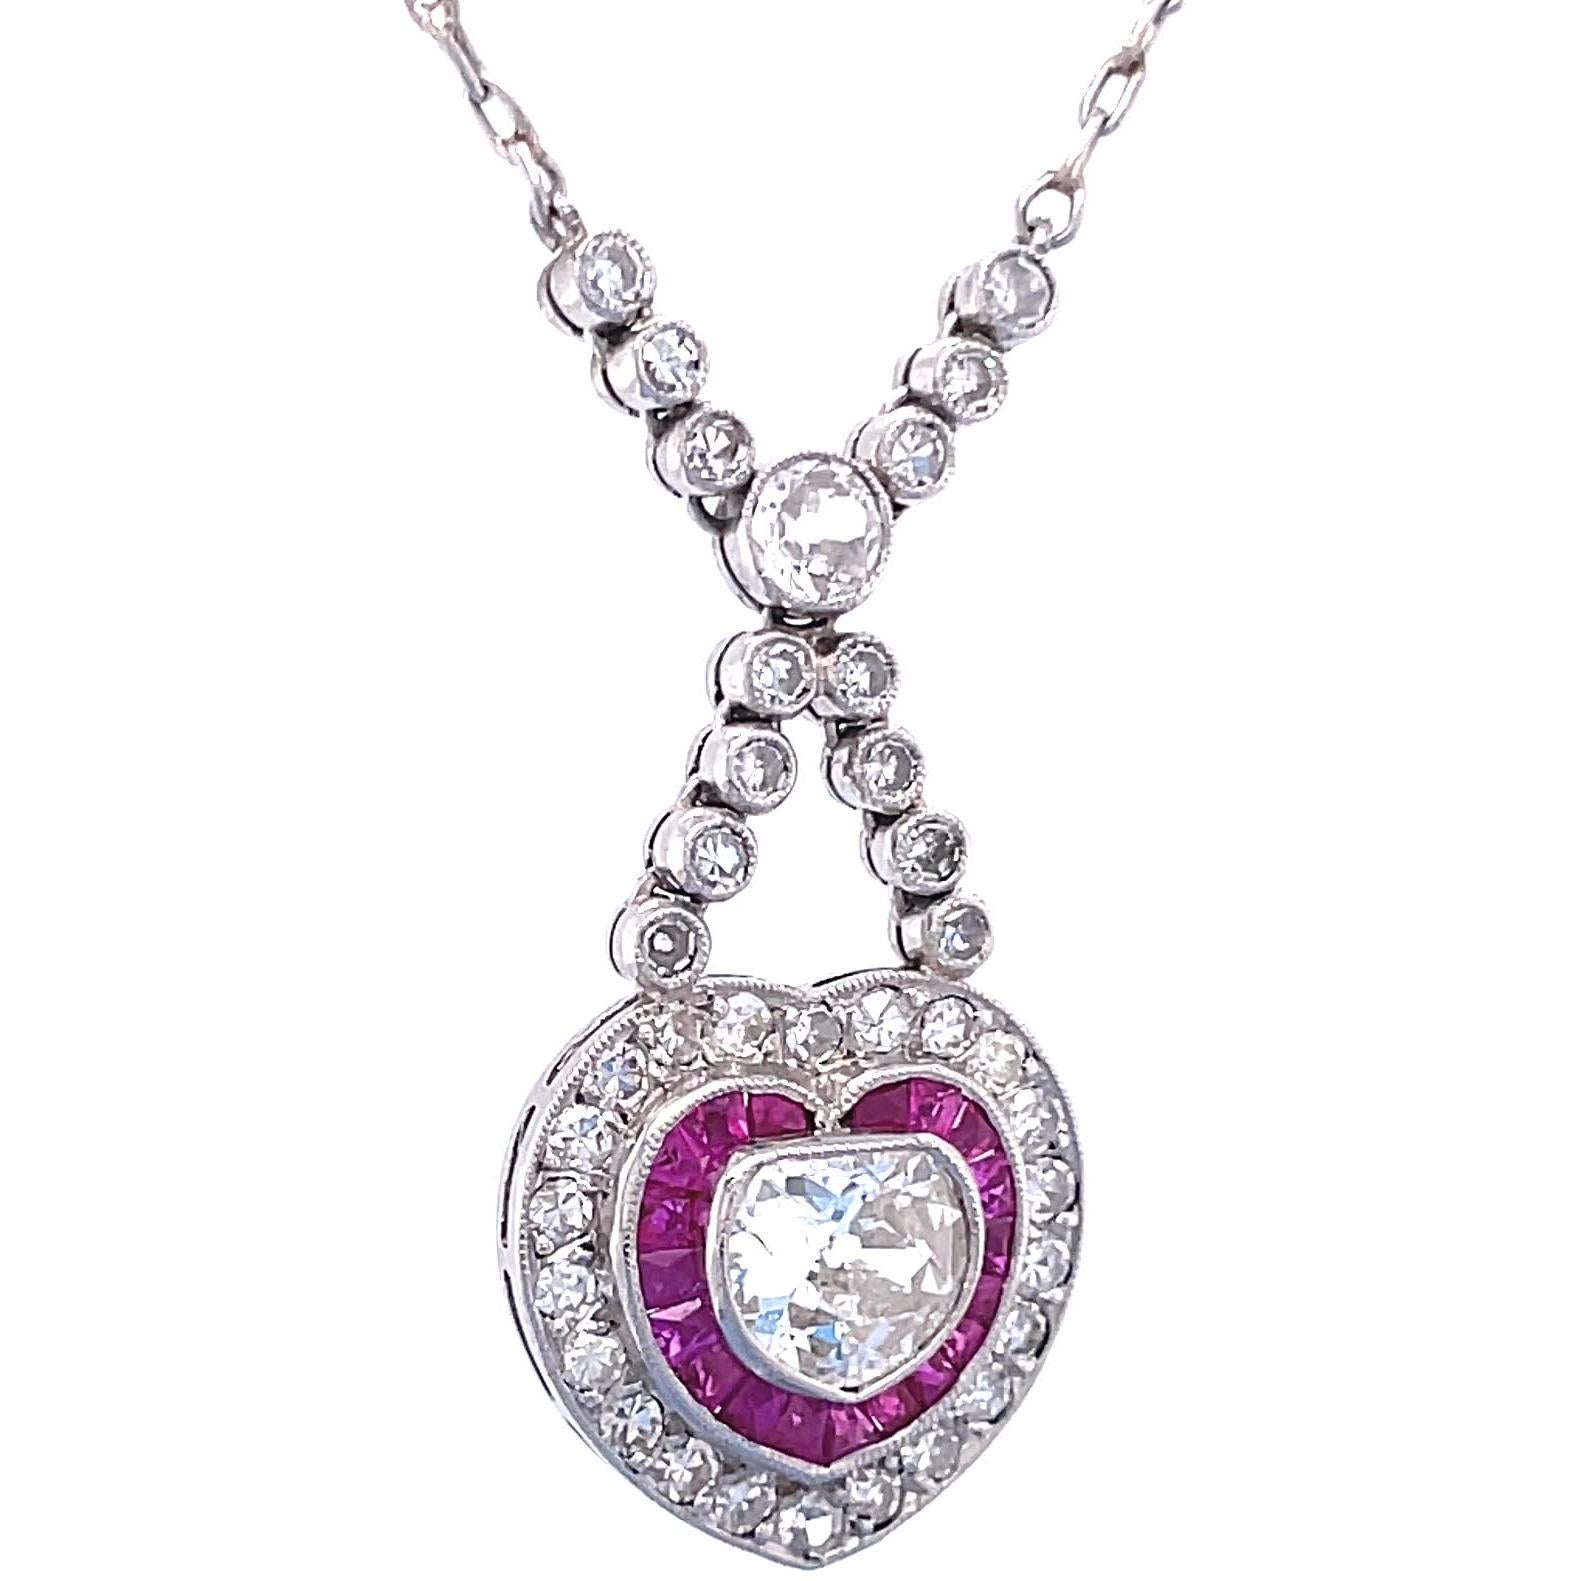 Mixed Cut Art Deco Inspired Necklace Diamond Ruby Platinum